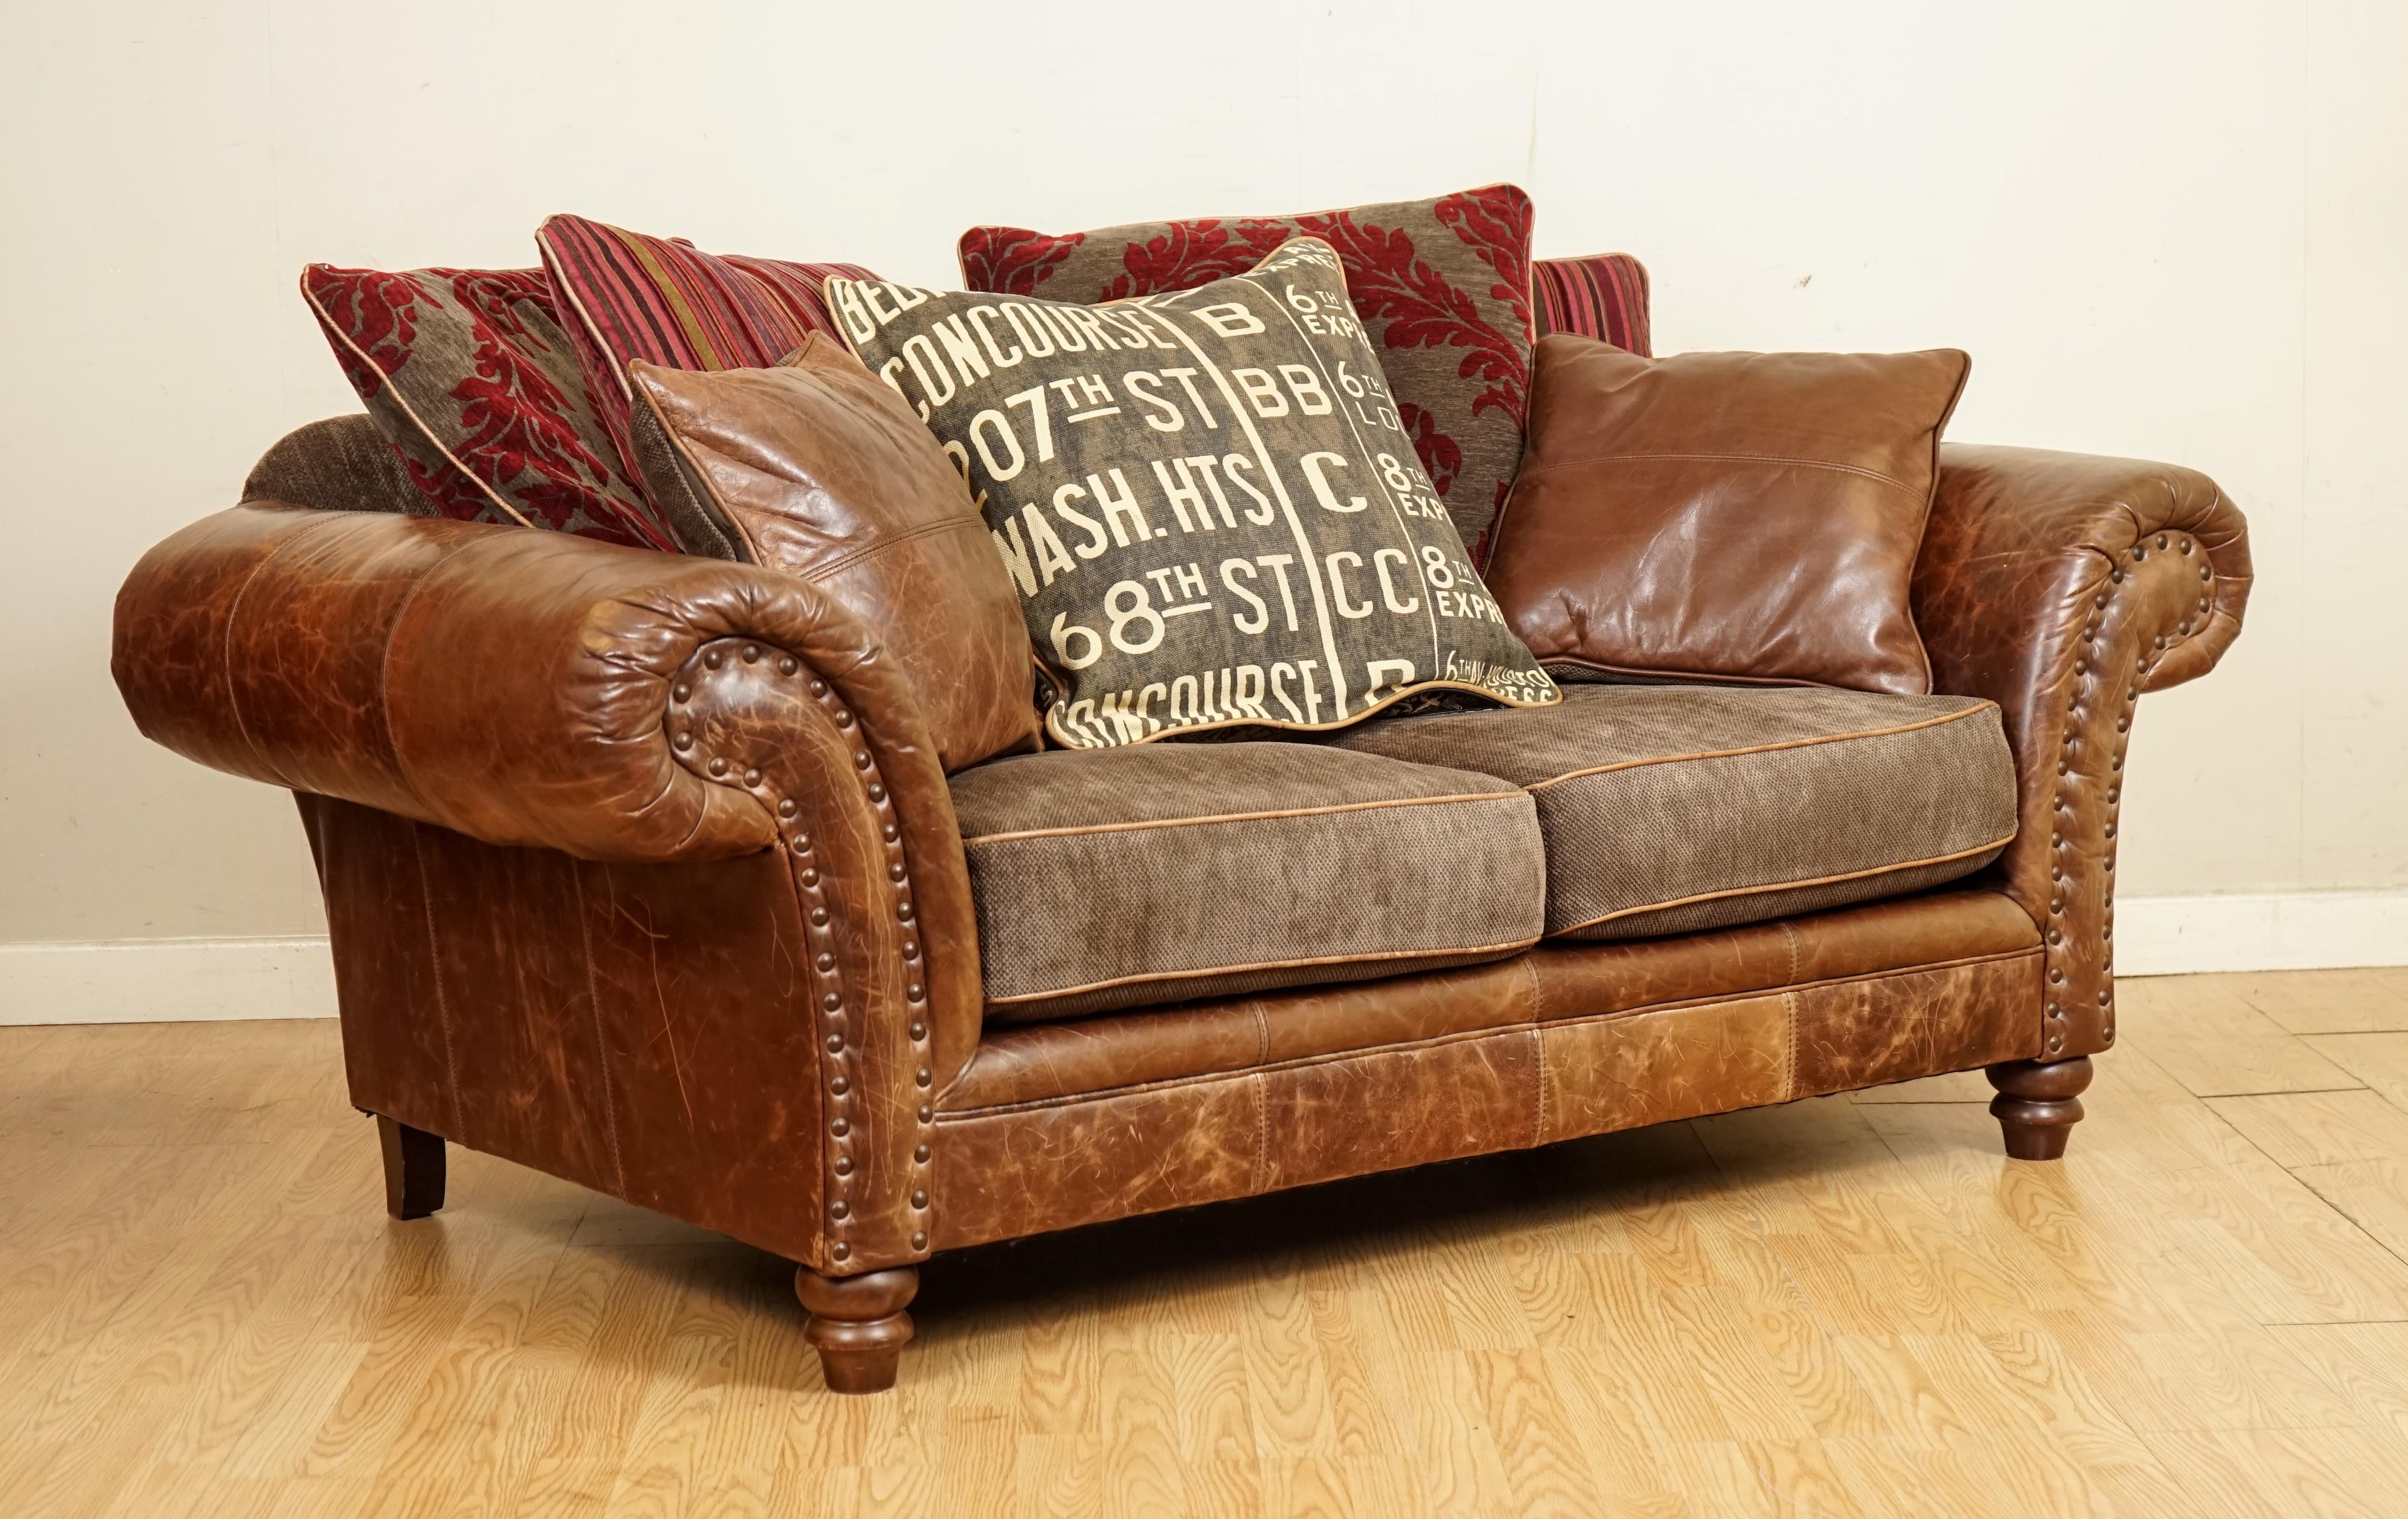 We are so excited to present to you this Alexander & James Chesterfield two seater leather and fabric sofa with Scatter Cushions.

There is a small repair on the leather under the right arm, which isn't noticeable.

A very well made, solid and